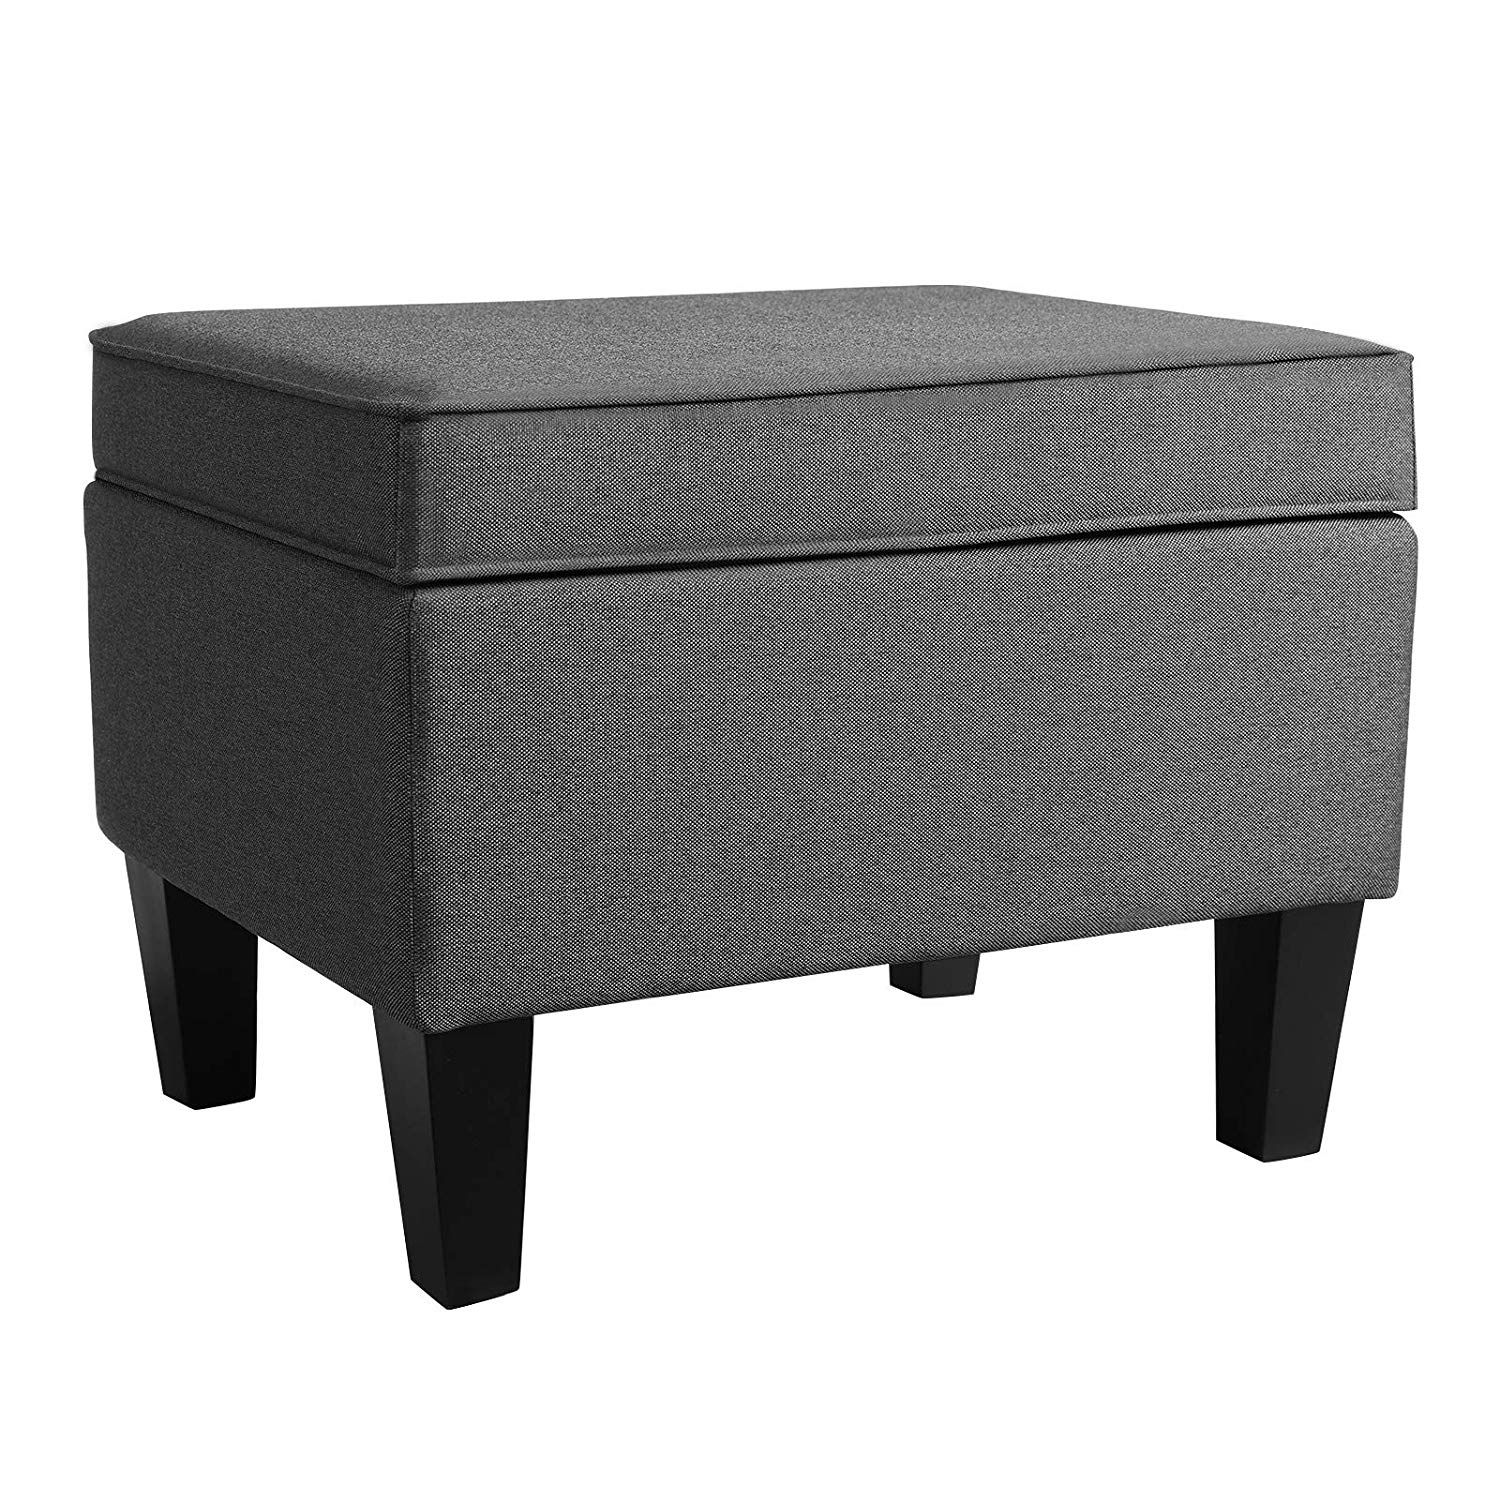 Rectangular Fabric Upholstered Wooden Frame Storage Ottoman, Gray Throughout Gray Fabric Oval Ottomans (Gallery 20 of 20)